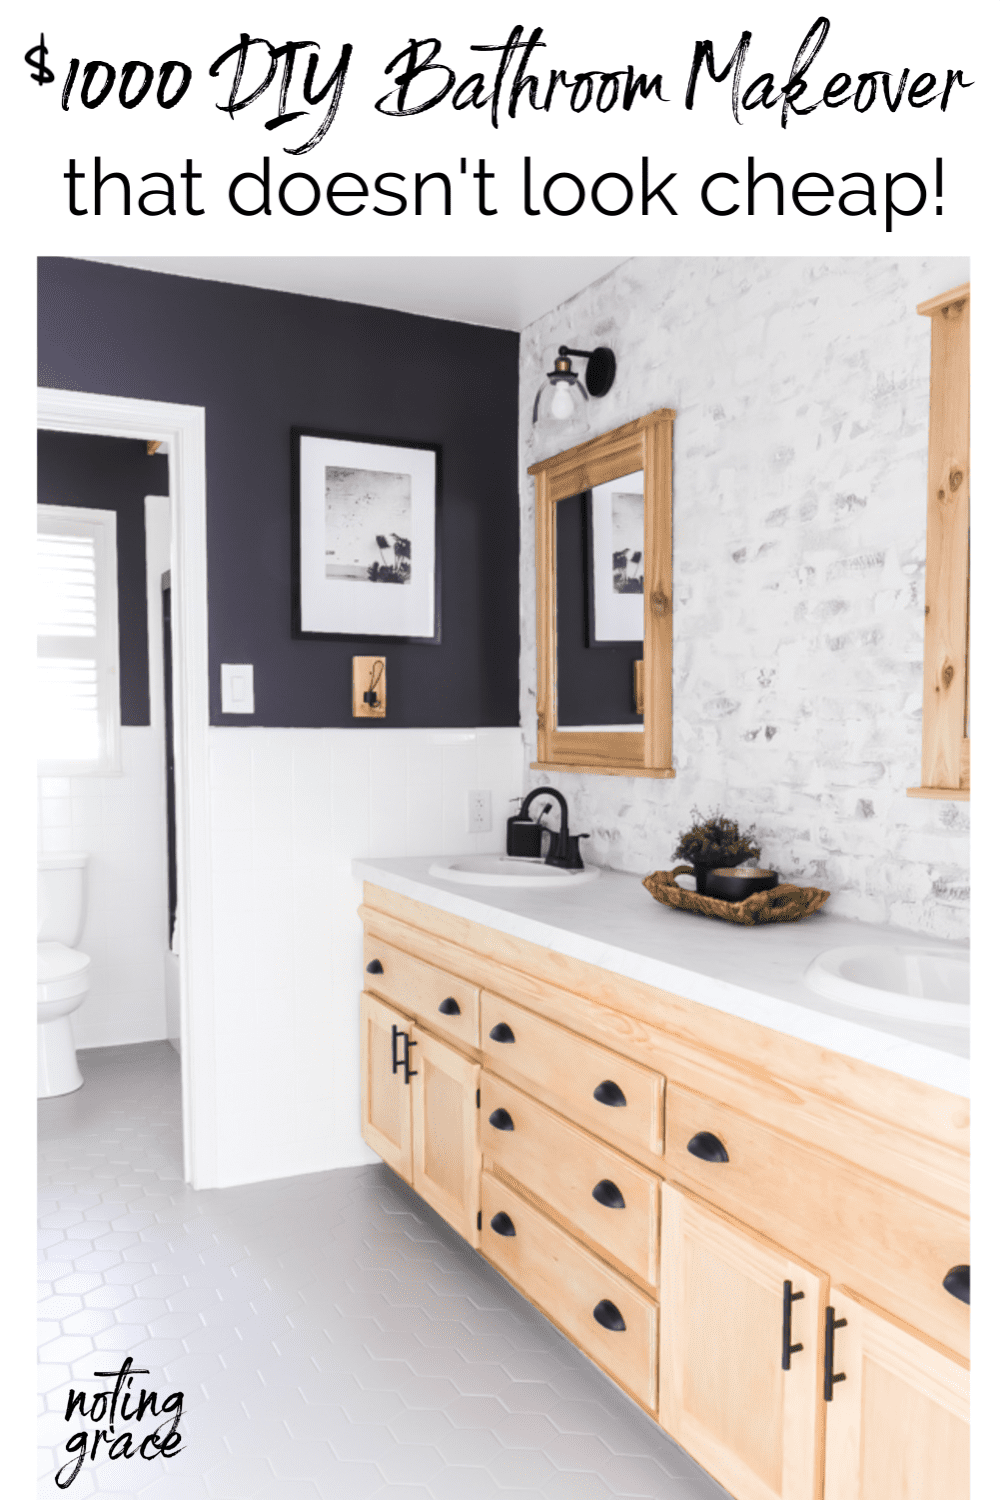 1000 Diy Bathroom Makeover That Doesn, Bathroom Remodeling Ideas On A Budget